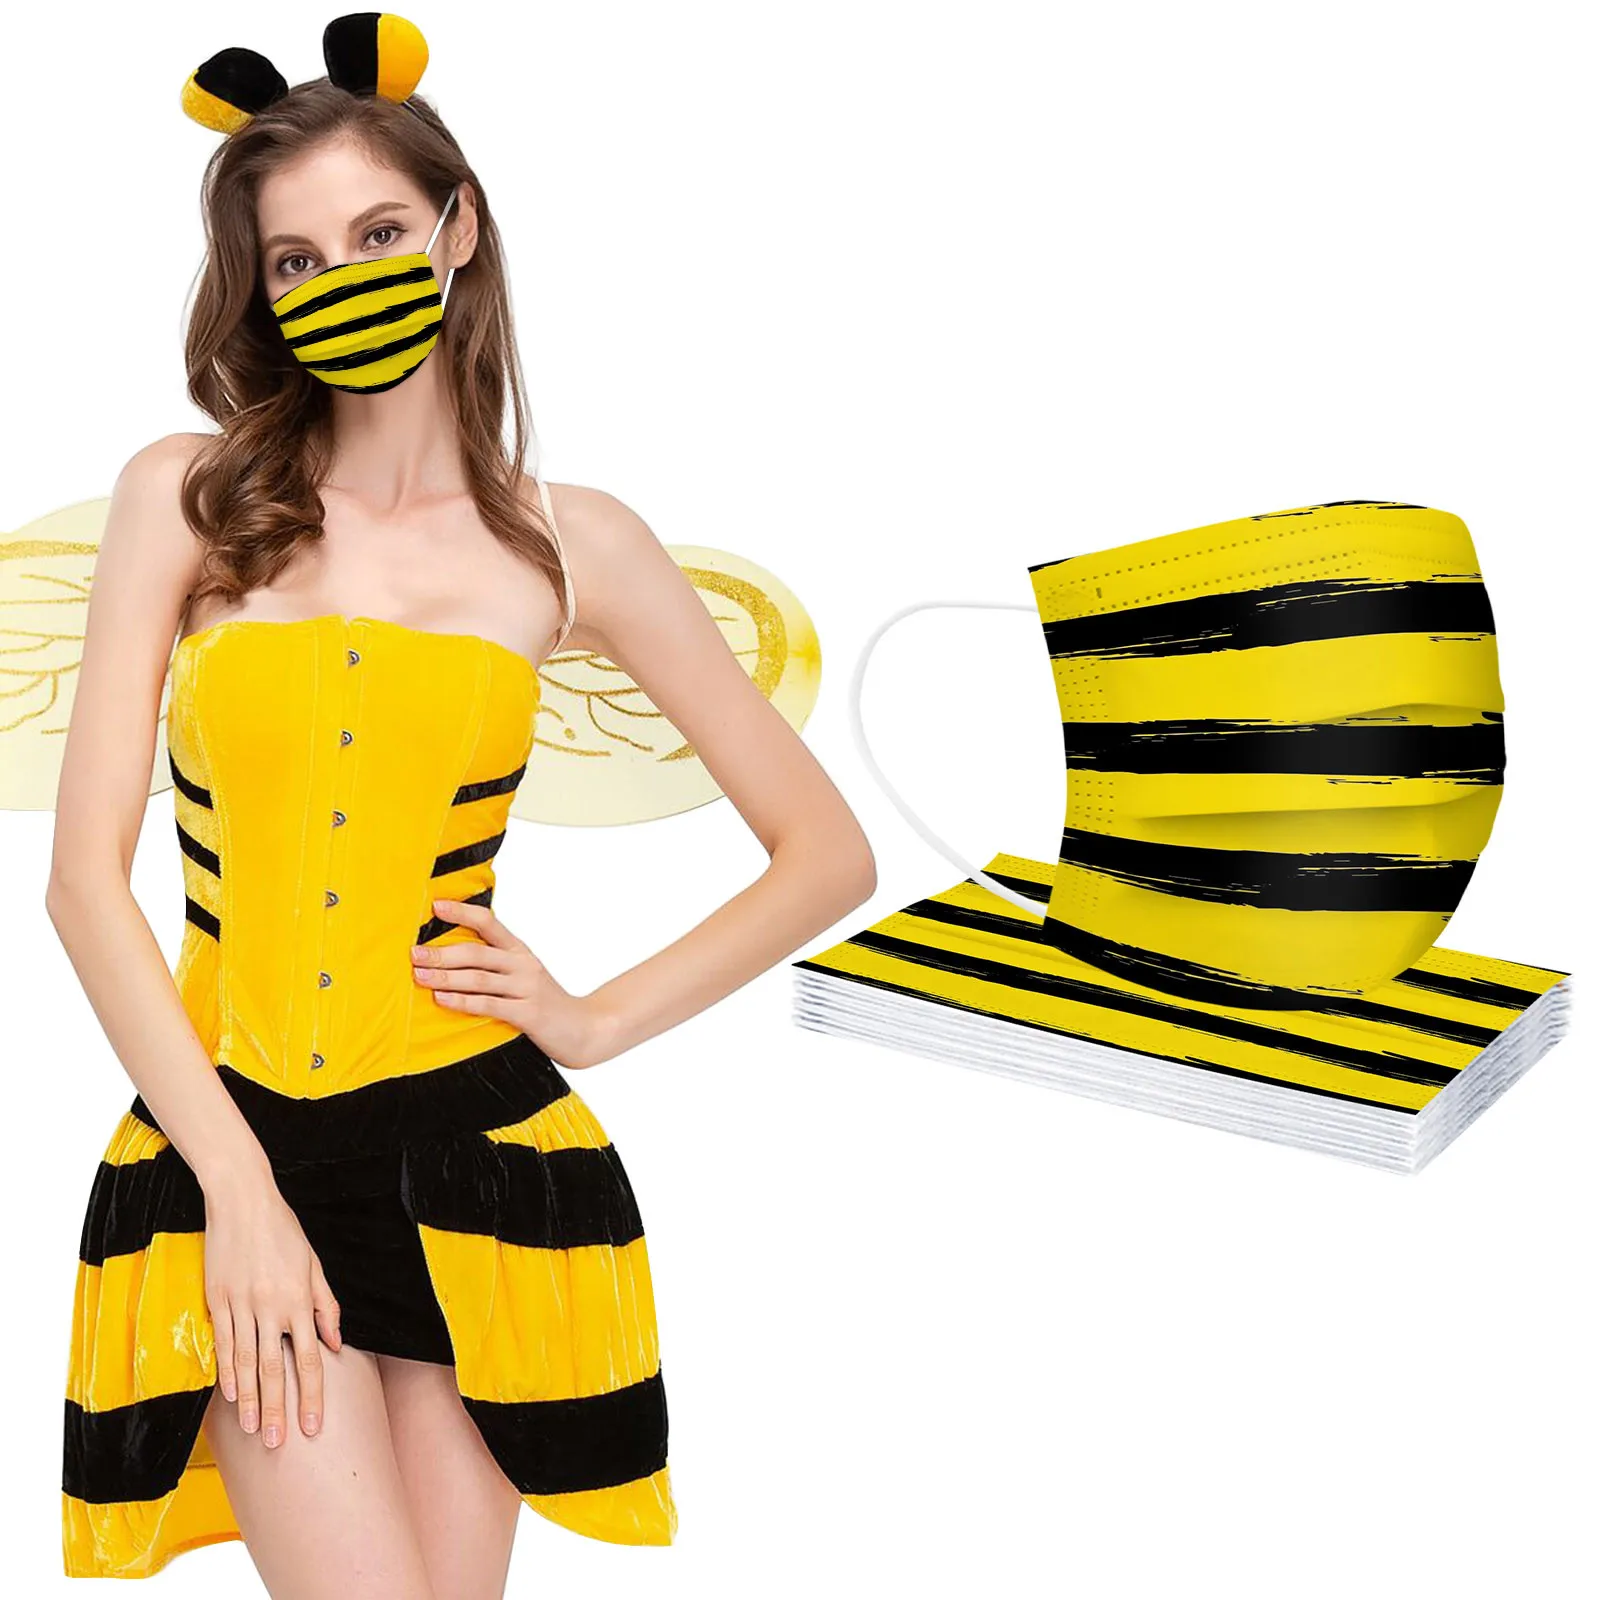 Adult Mascarillas Bee Print Masques for Protection Face Masque Earloop Masque cubre bocas Halloween cosplay маска tapabocas unique halloween costumes